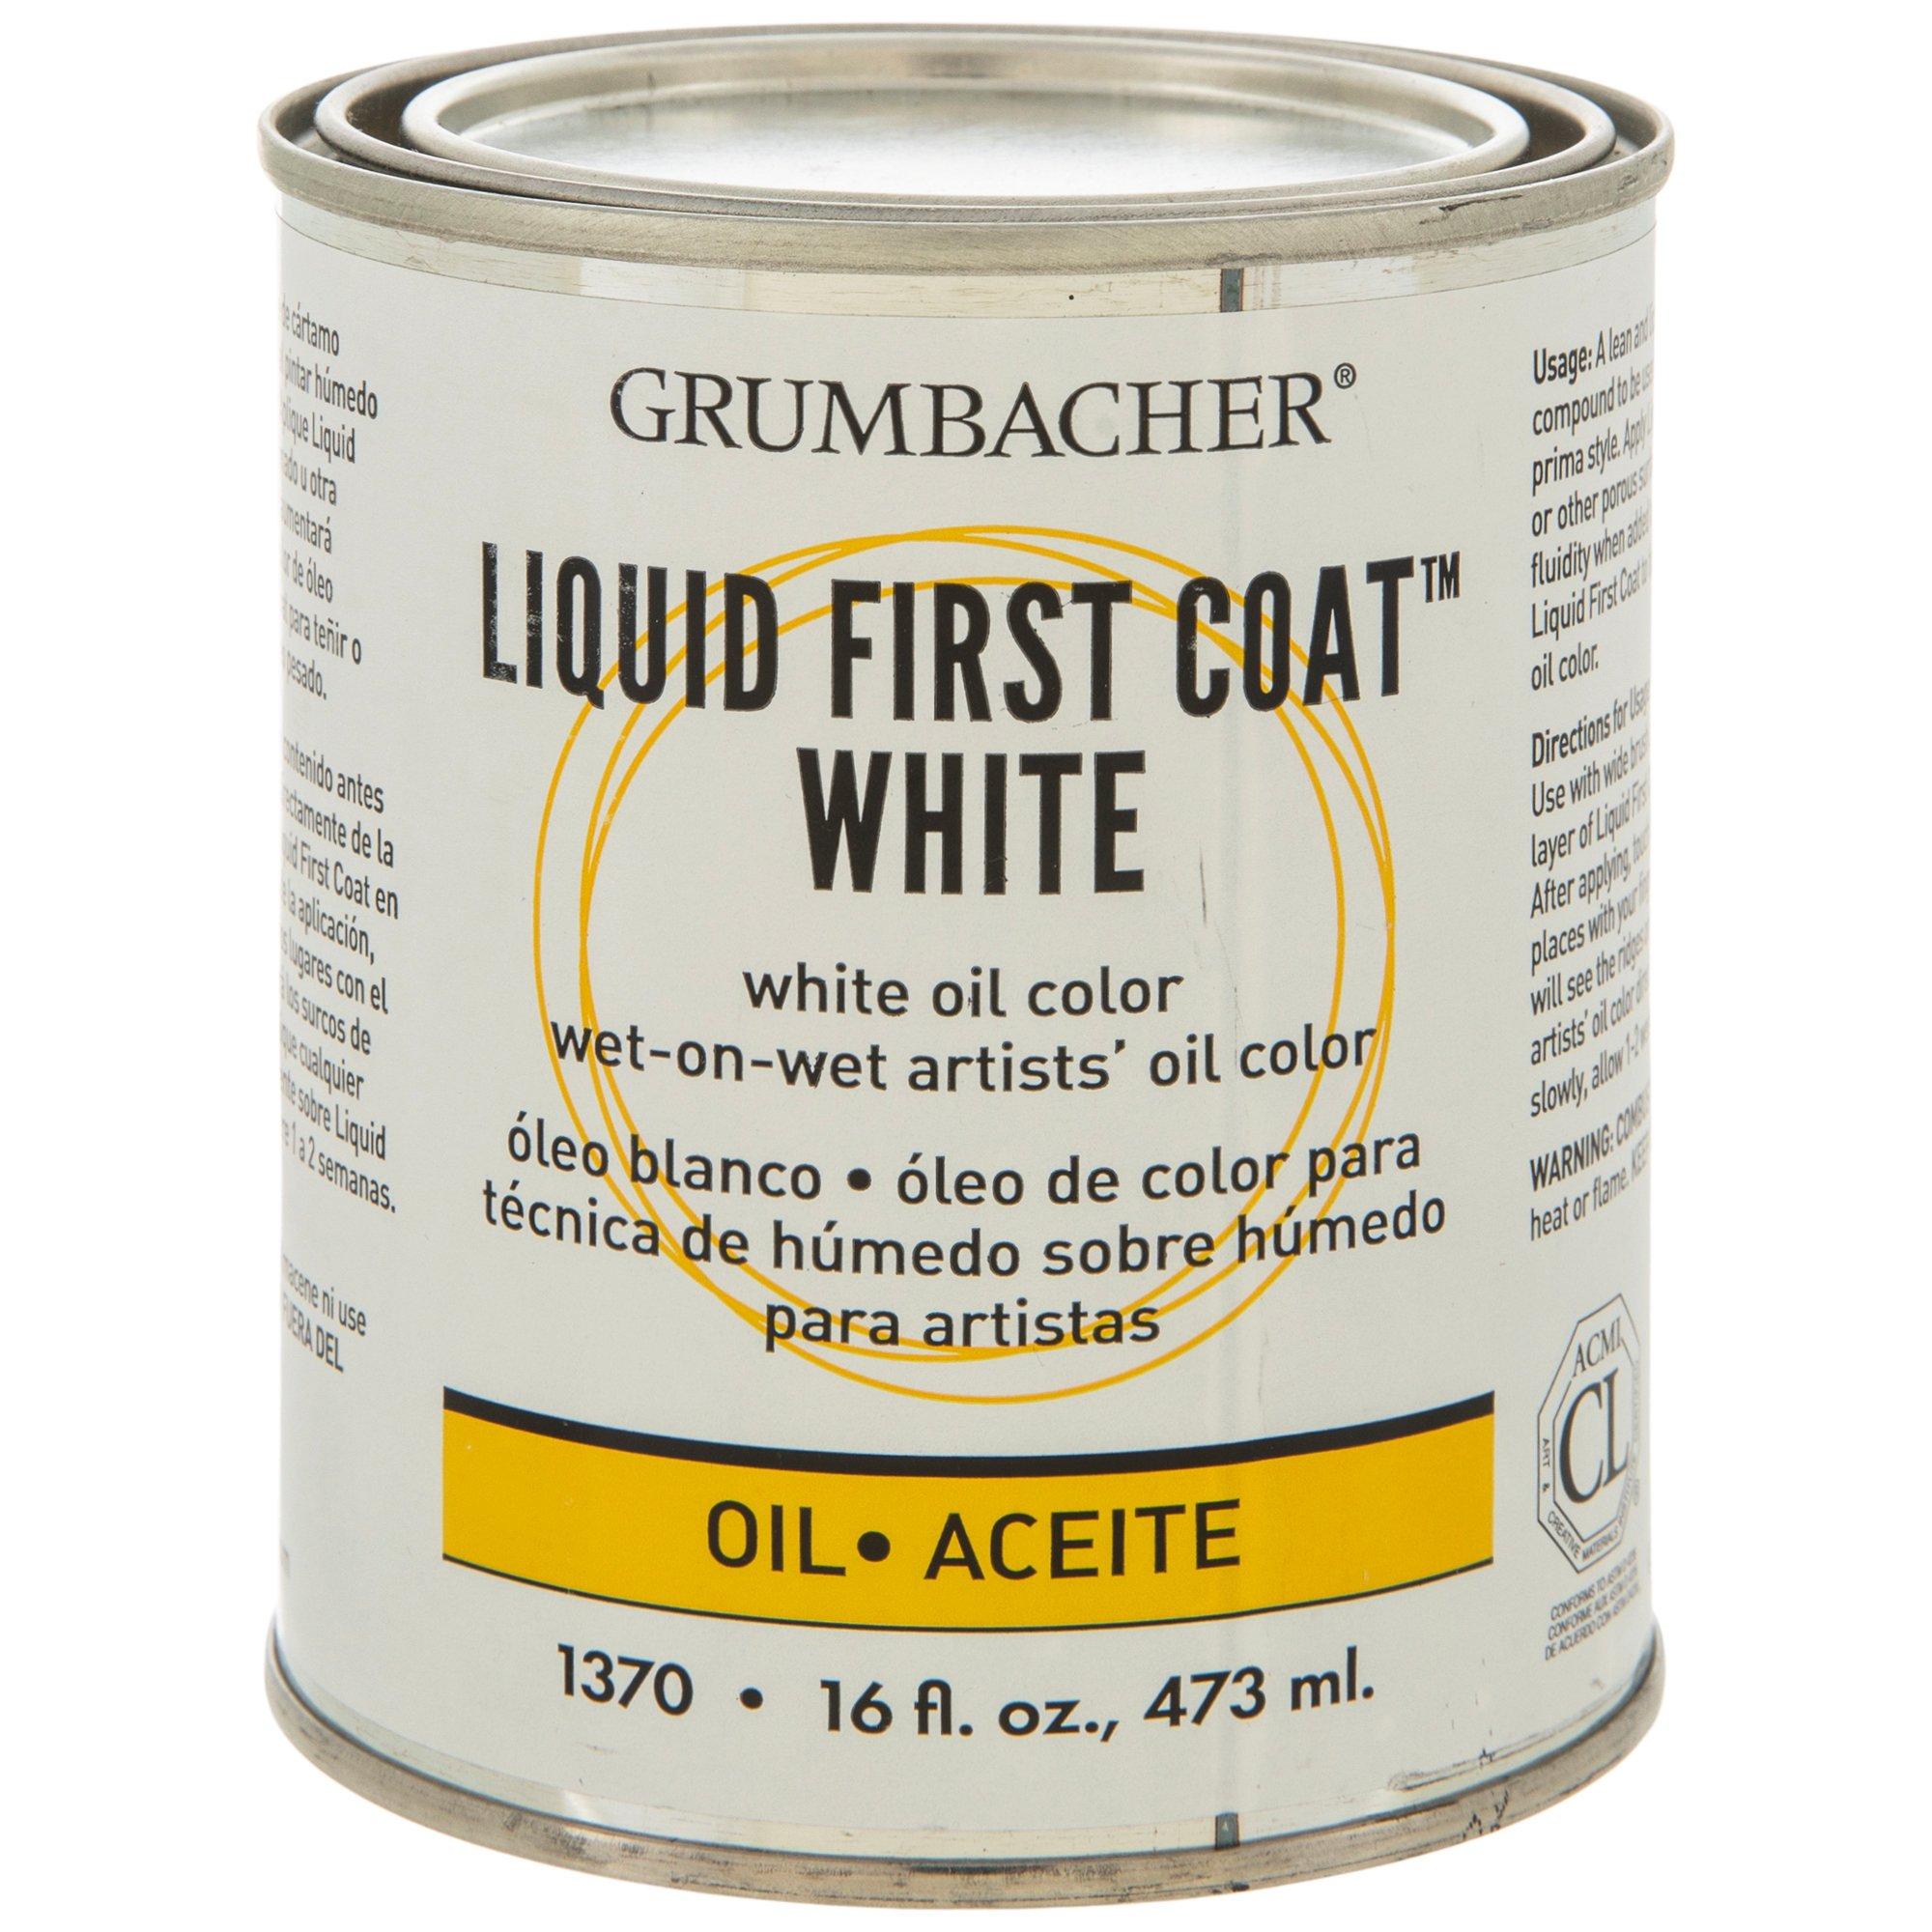 Hobby Lobby now sells generic liquid white and liquid clear from